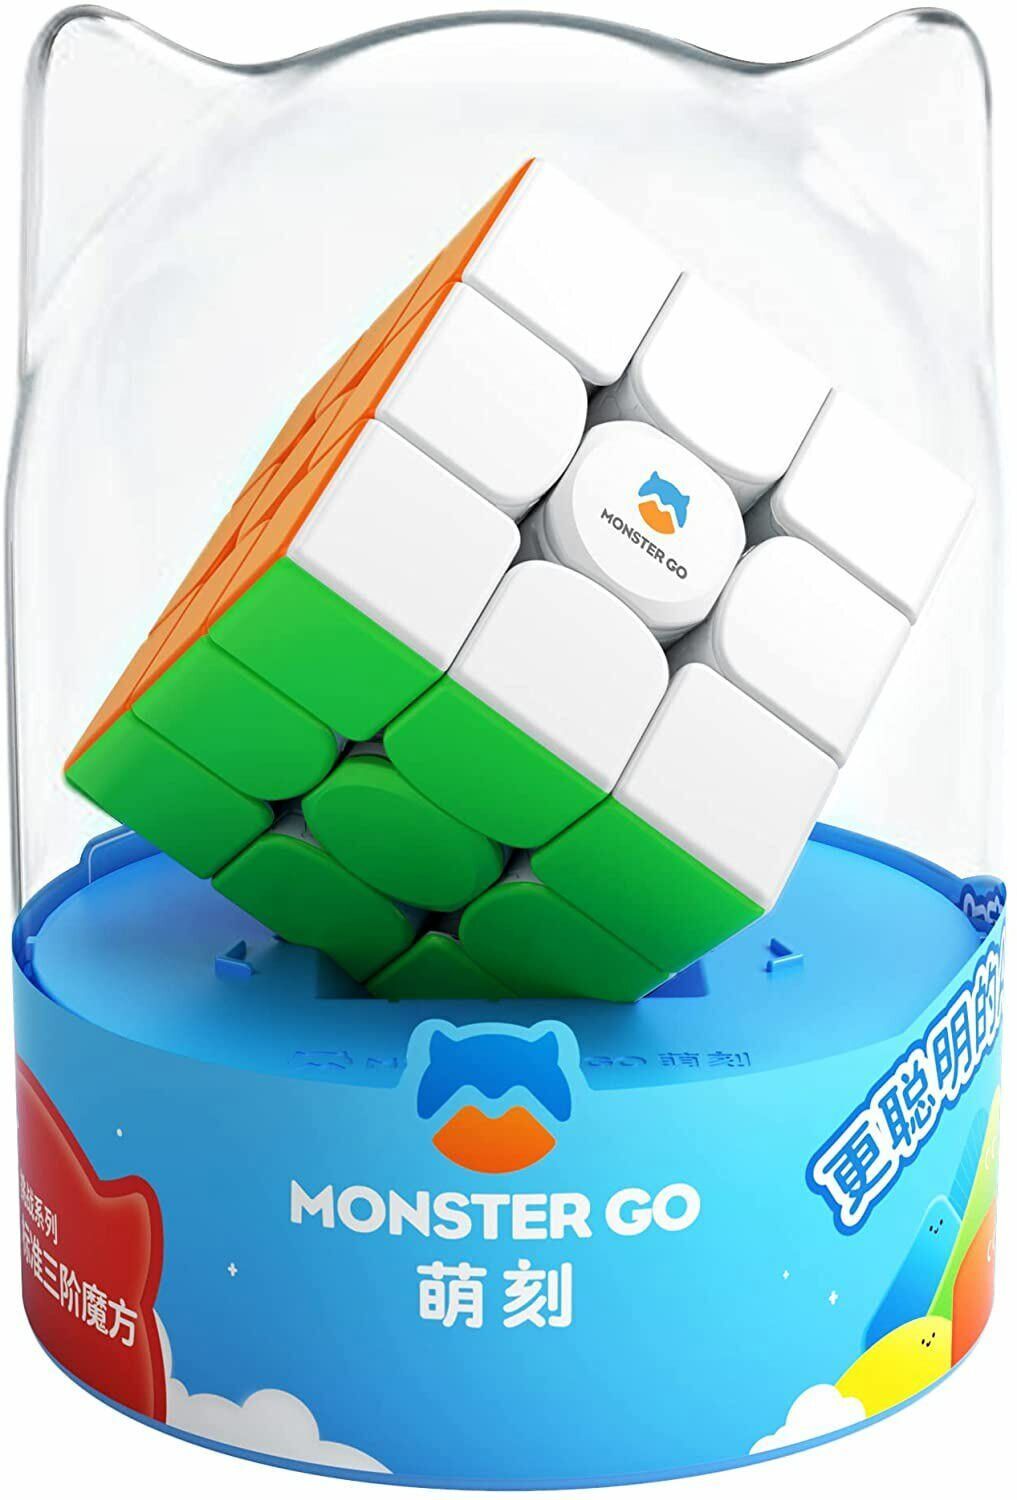 Monster Go Magnetic Speed Cube 3X3X3 Magic Cube Mg3 Learning Series Puzzle Toy - $31.99